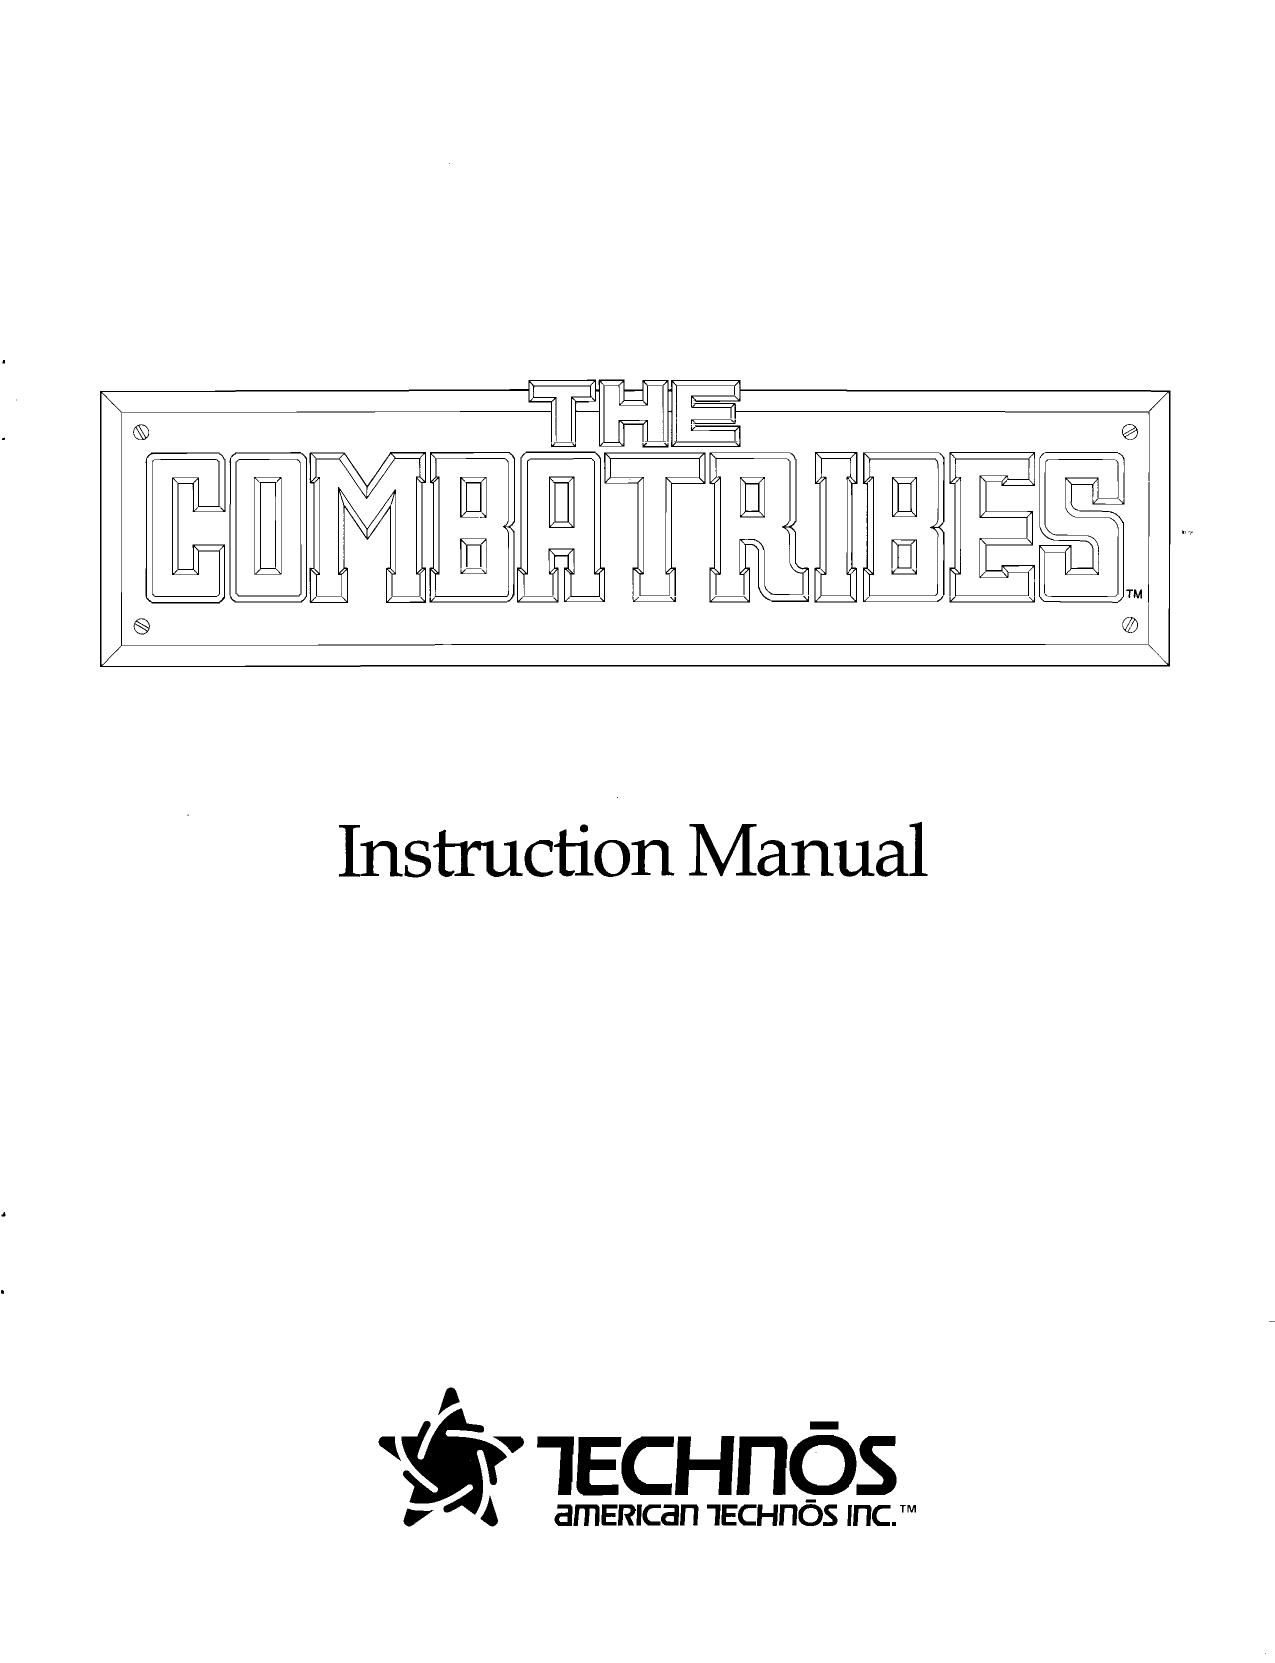 The Combatribes Instruction Manual